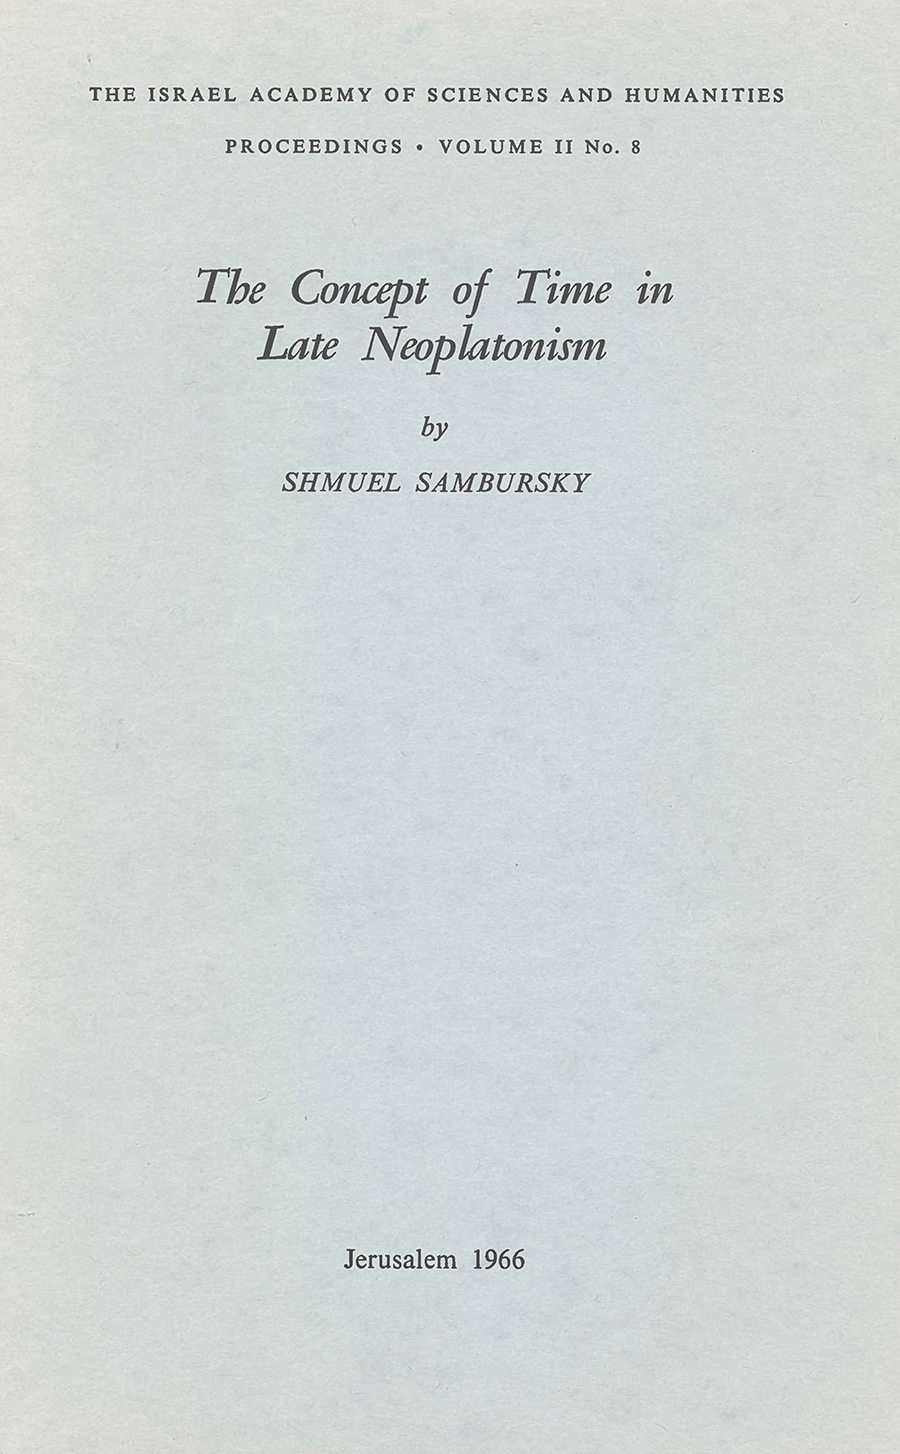 The Concept of Time in Late Neoplatonism